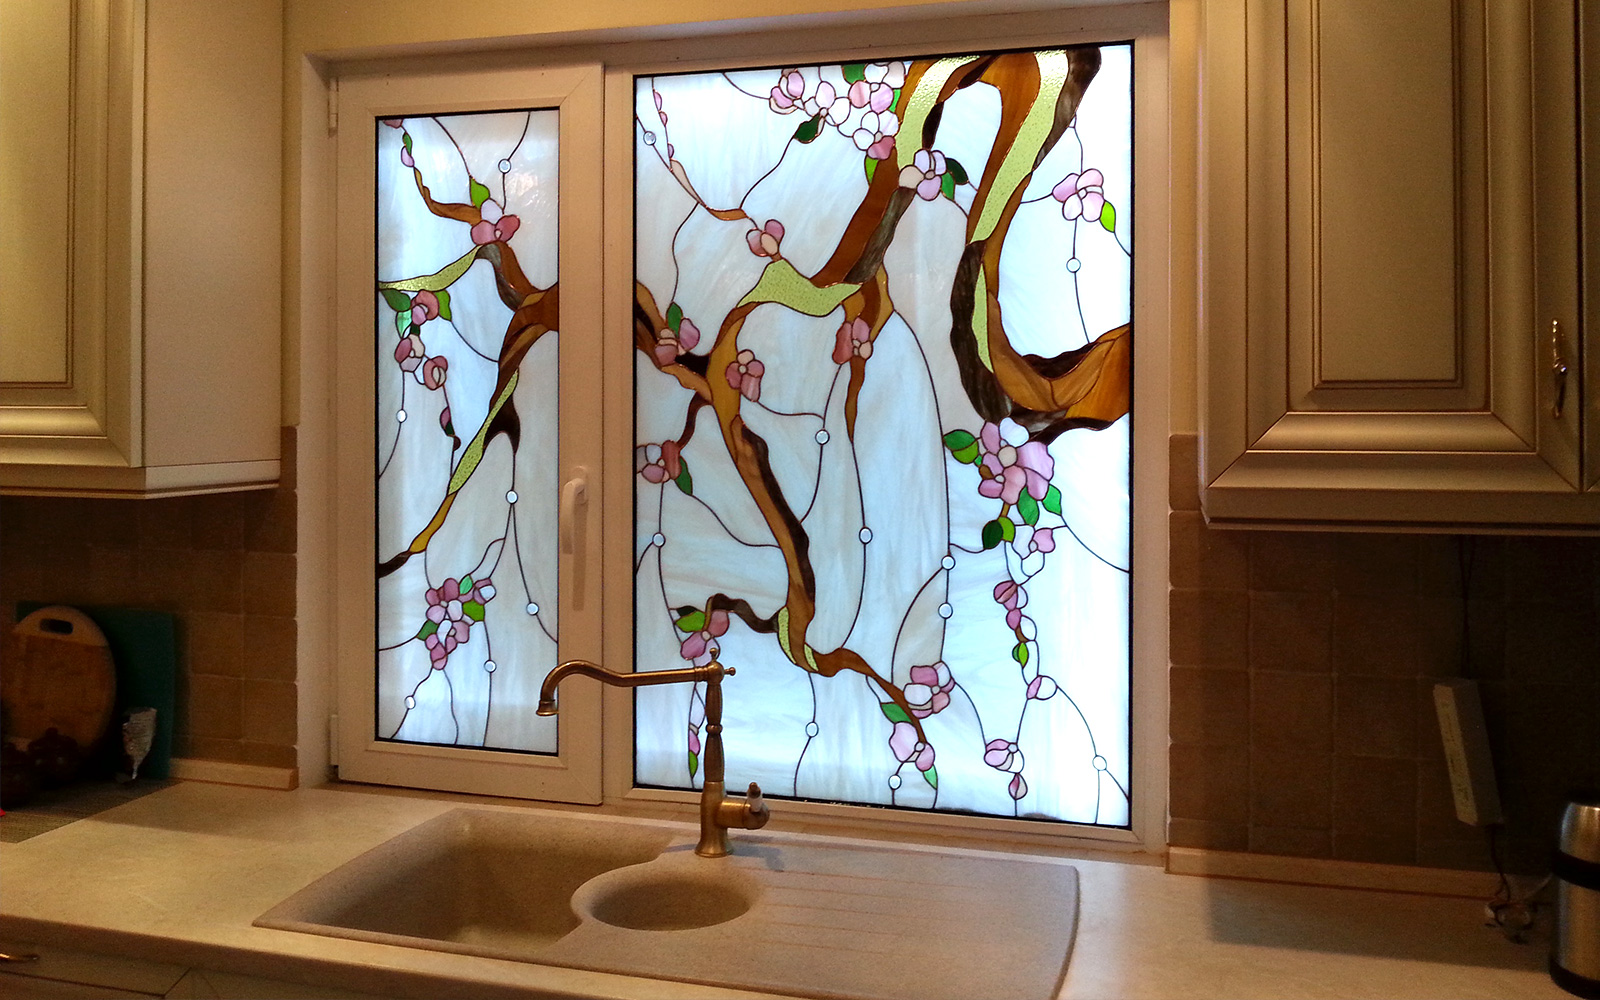 How to provide stained glass with necessary care?